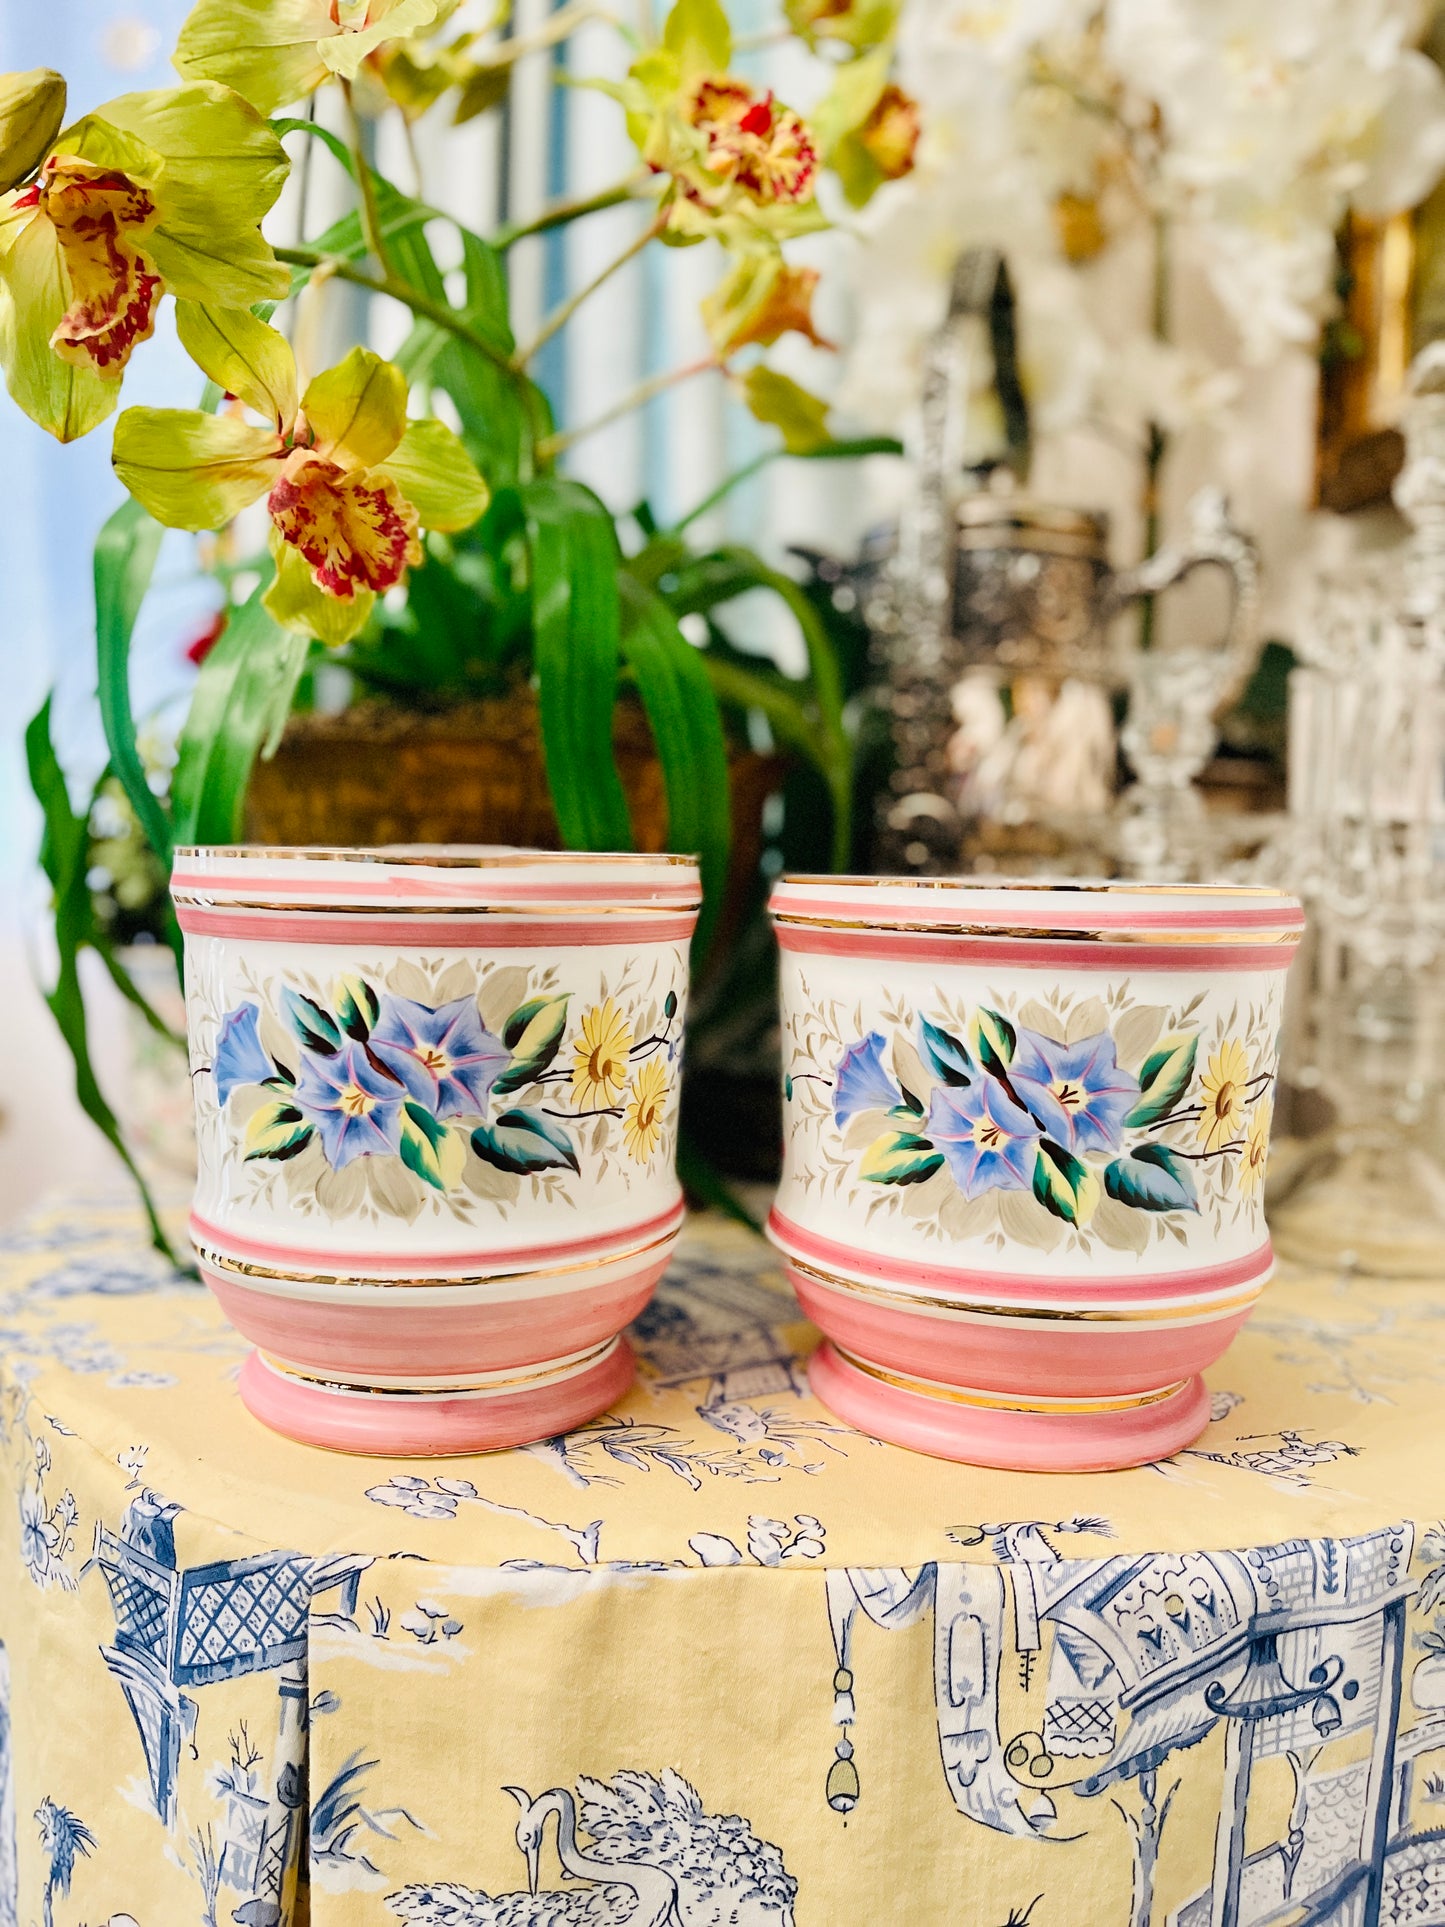 Vintage Porcelain Jardiniere, Pink and White with Hand Painted Flowers and Gilt Detail, Made in Germany, Estate Decor